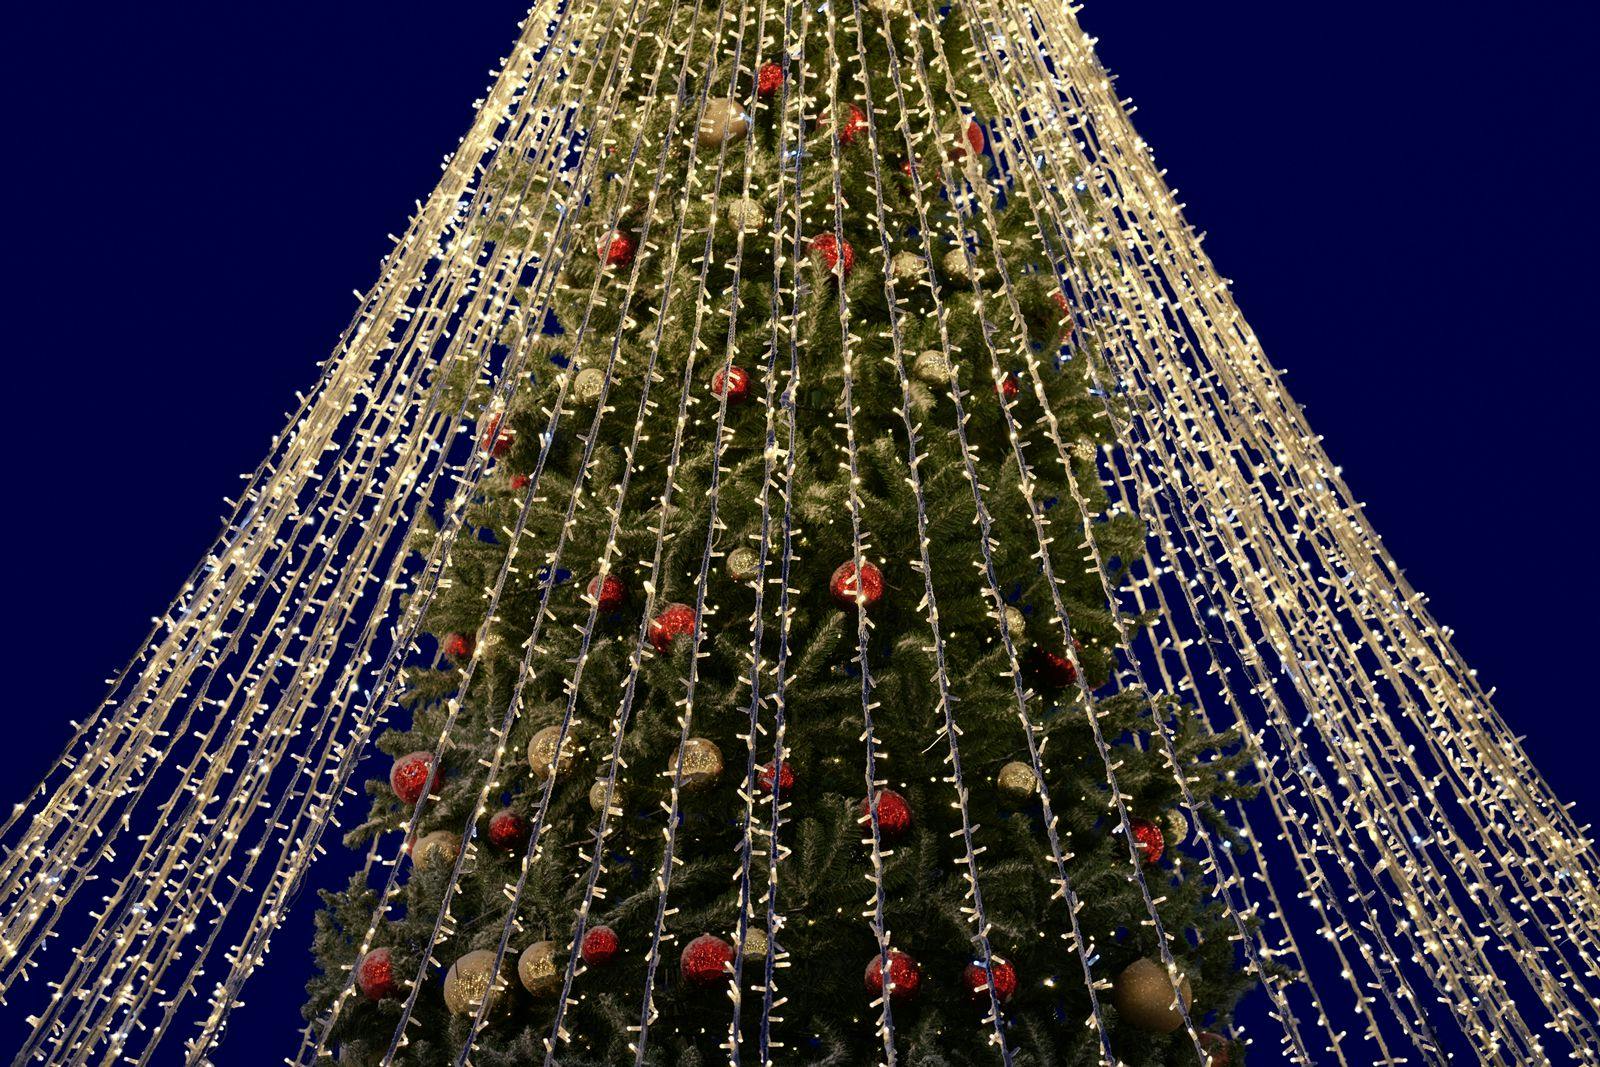 CLose up of a Christmas tree decorated with baubles and with garlands of lights